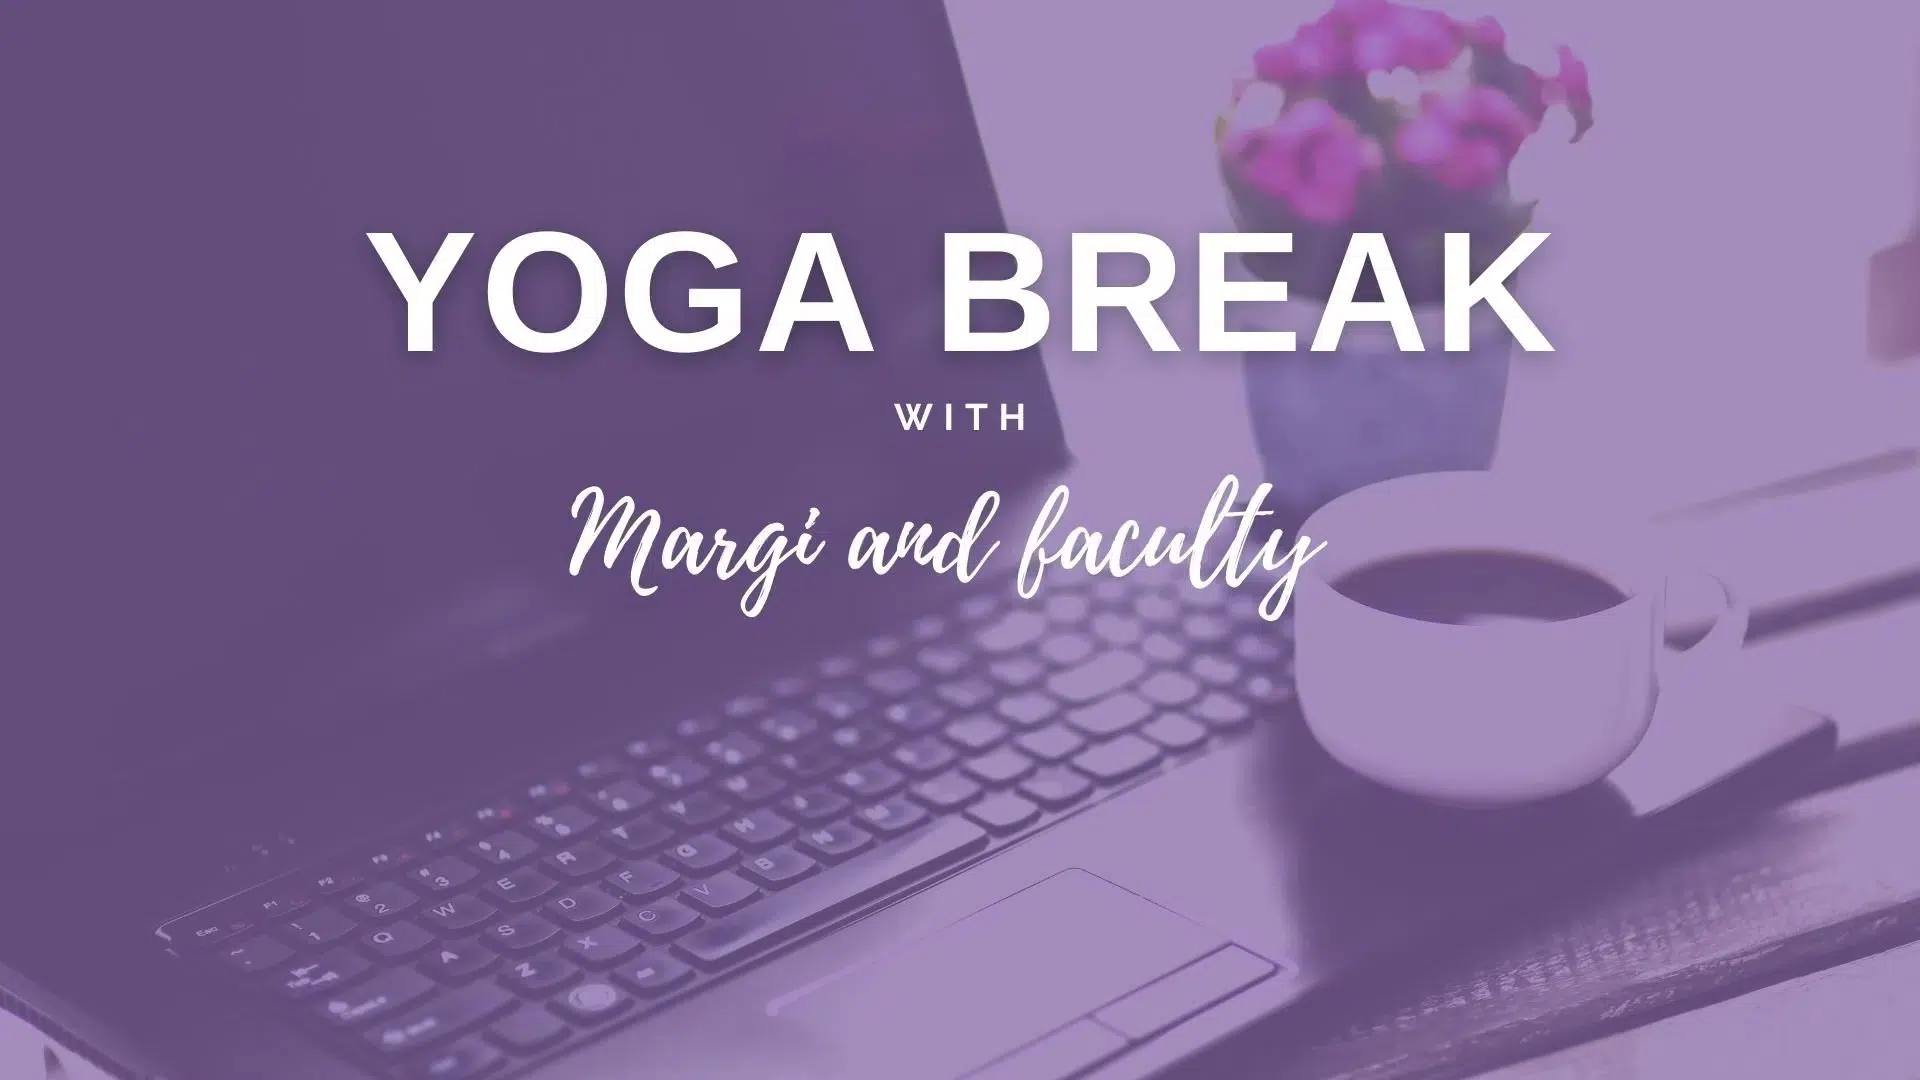 Yoga Break with Margi and Faculty